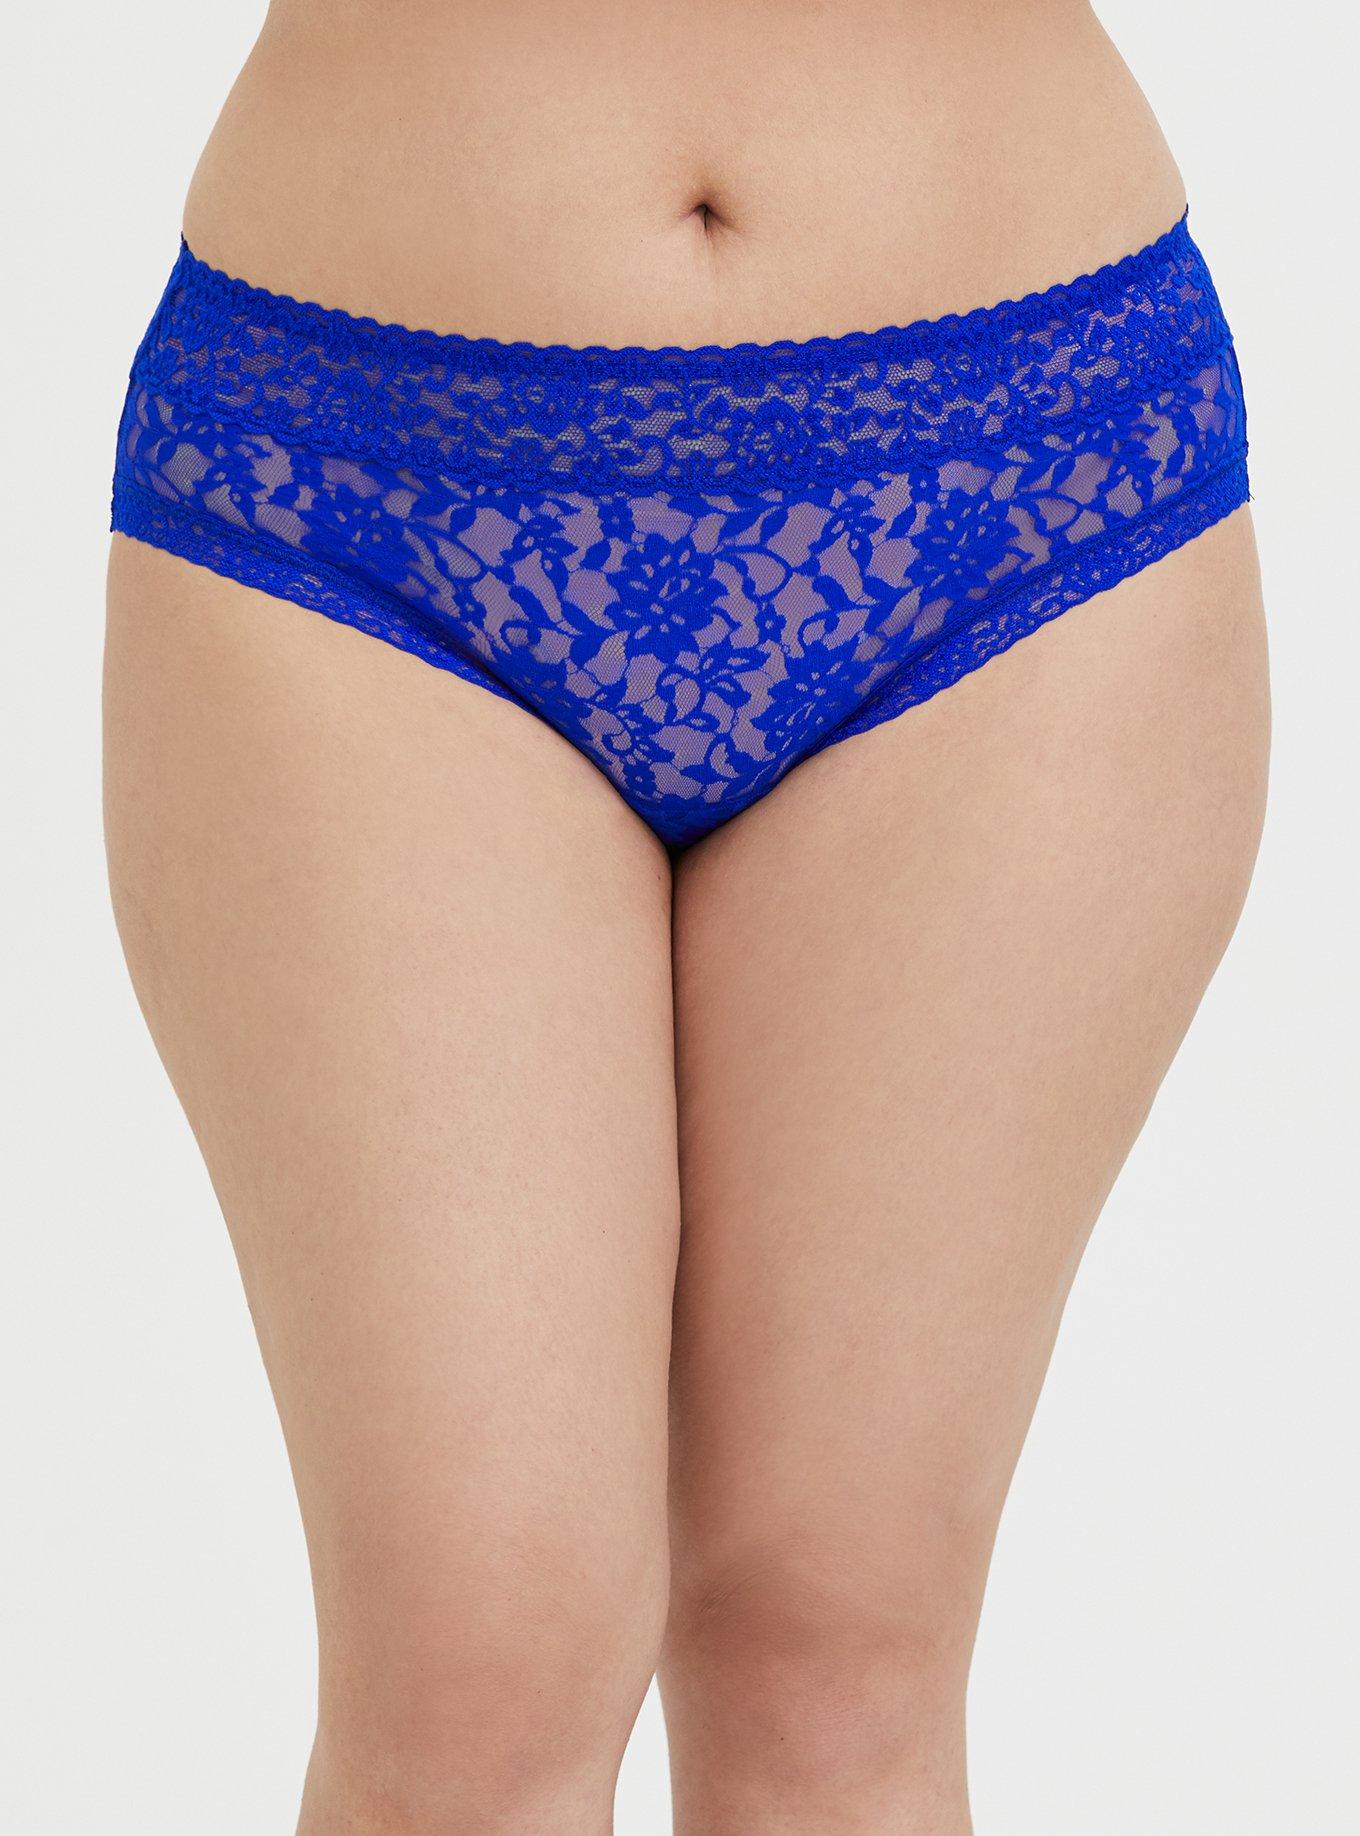 Lacy Line Sexy Open Crotch Lace Panties with Lace up Detail (Small